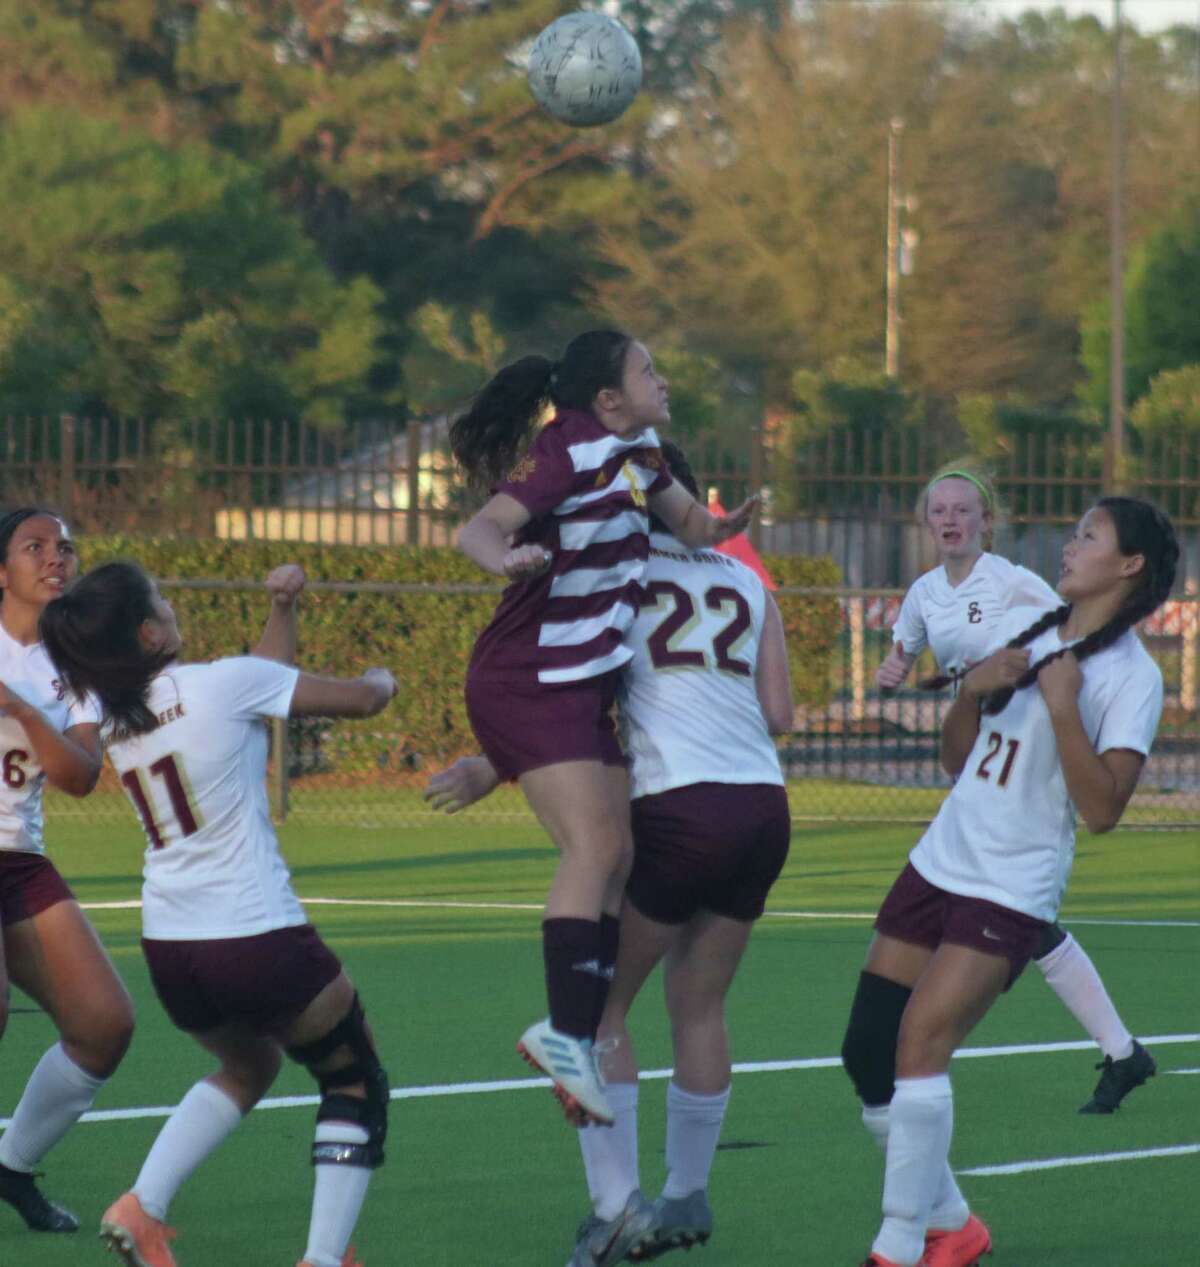 Outnumbered 5-1, a Deer Park player leaps up to head the ball not far from the Summer Creek goal Thursday night.